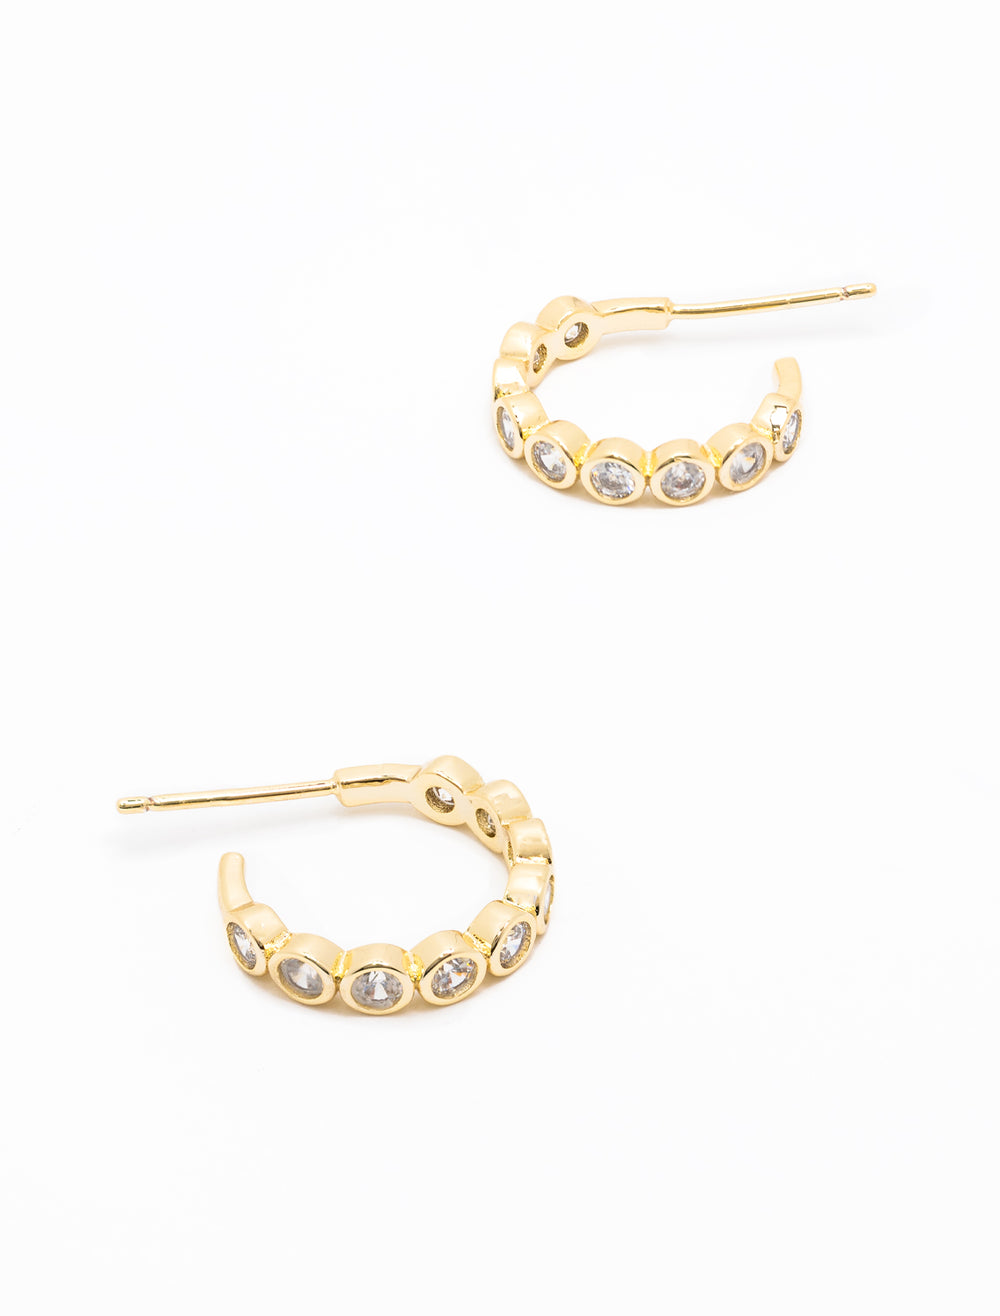 Close-up view of AV Max's Bezel Set CZ Baby Hoops in Gold.